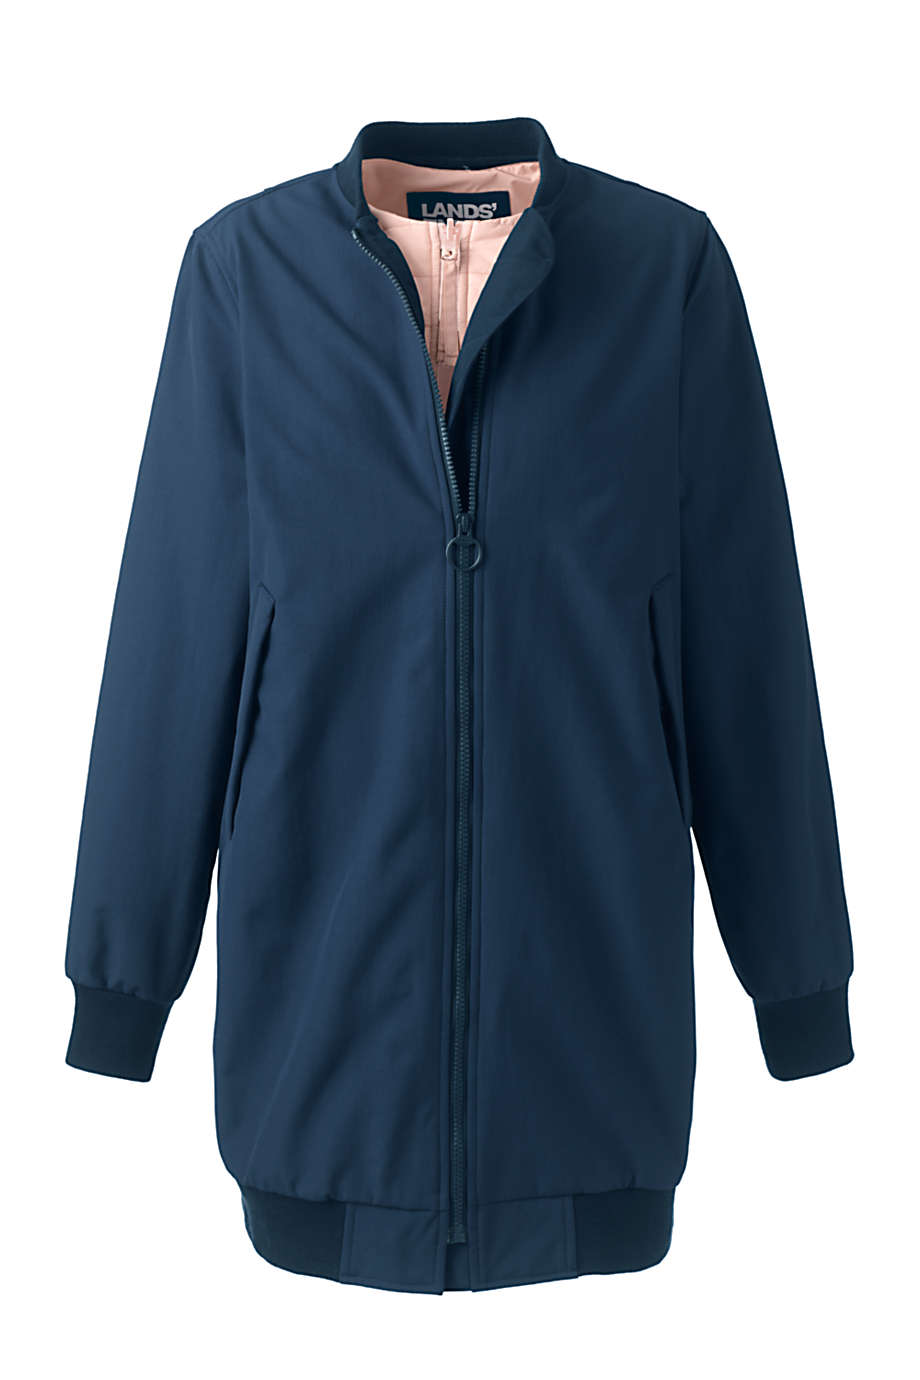 Lands' End Women's 3 in 1 Bomber Long Squall Coat